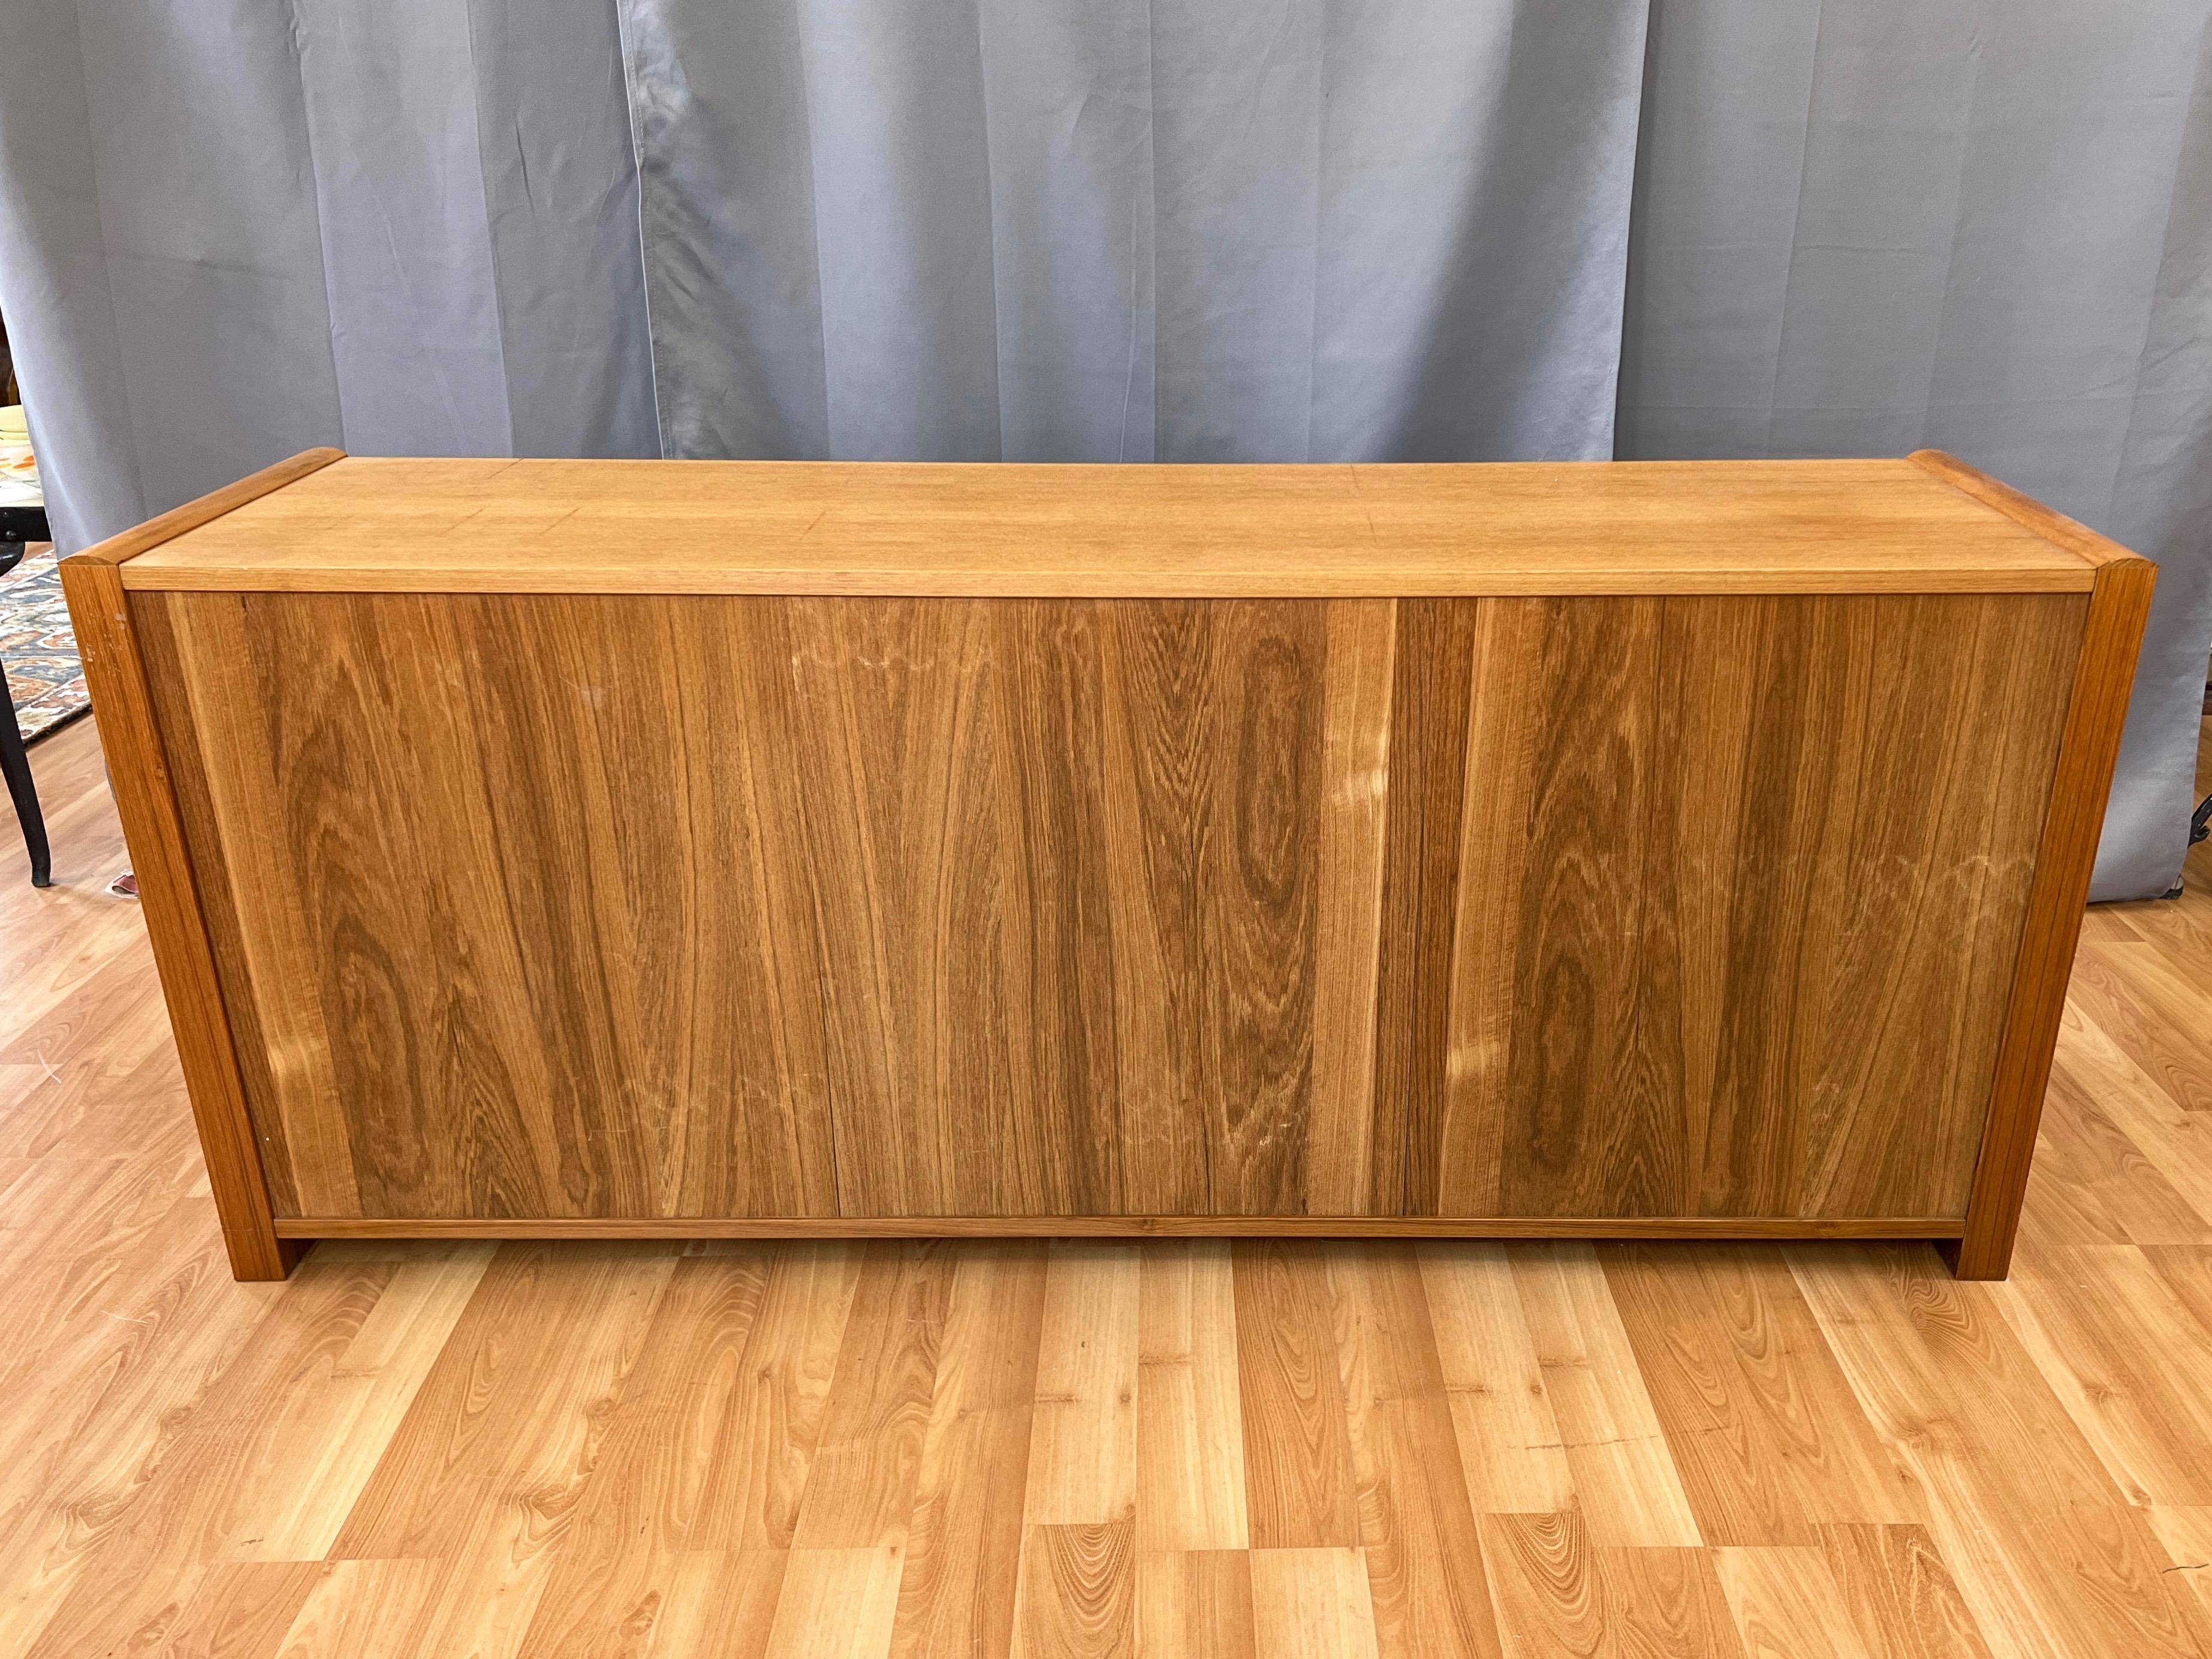 Danish Modern Long Teak Sideboard with Three Doors and Three Drawers, 1970s For Sale 8